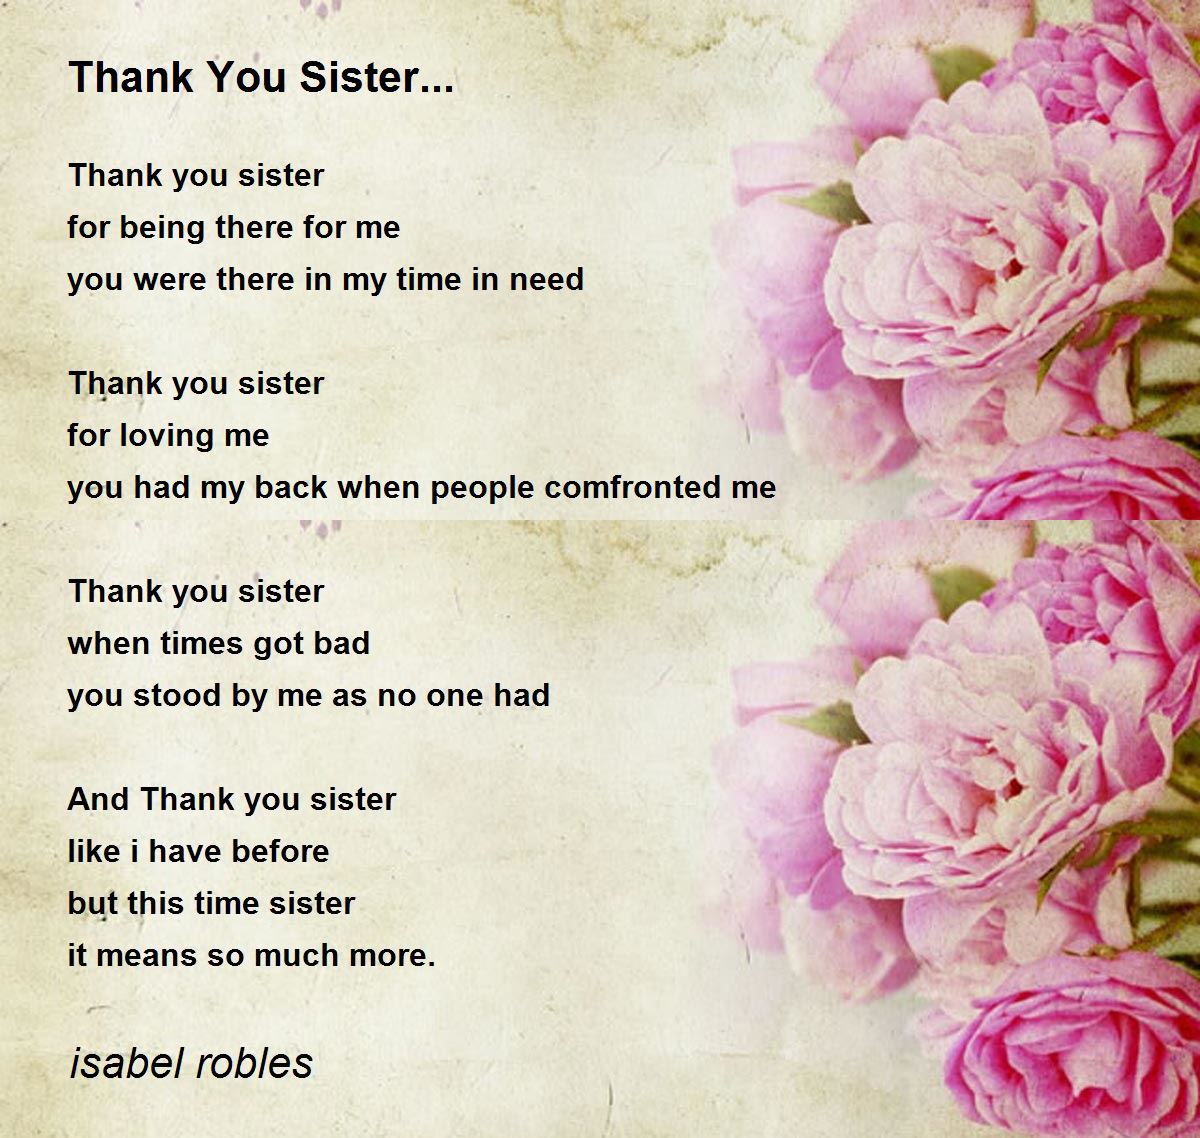 Thank You Sister... - Thank You Sister... Poem by isabel robles